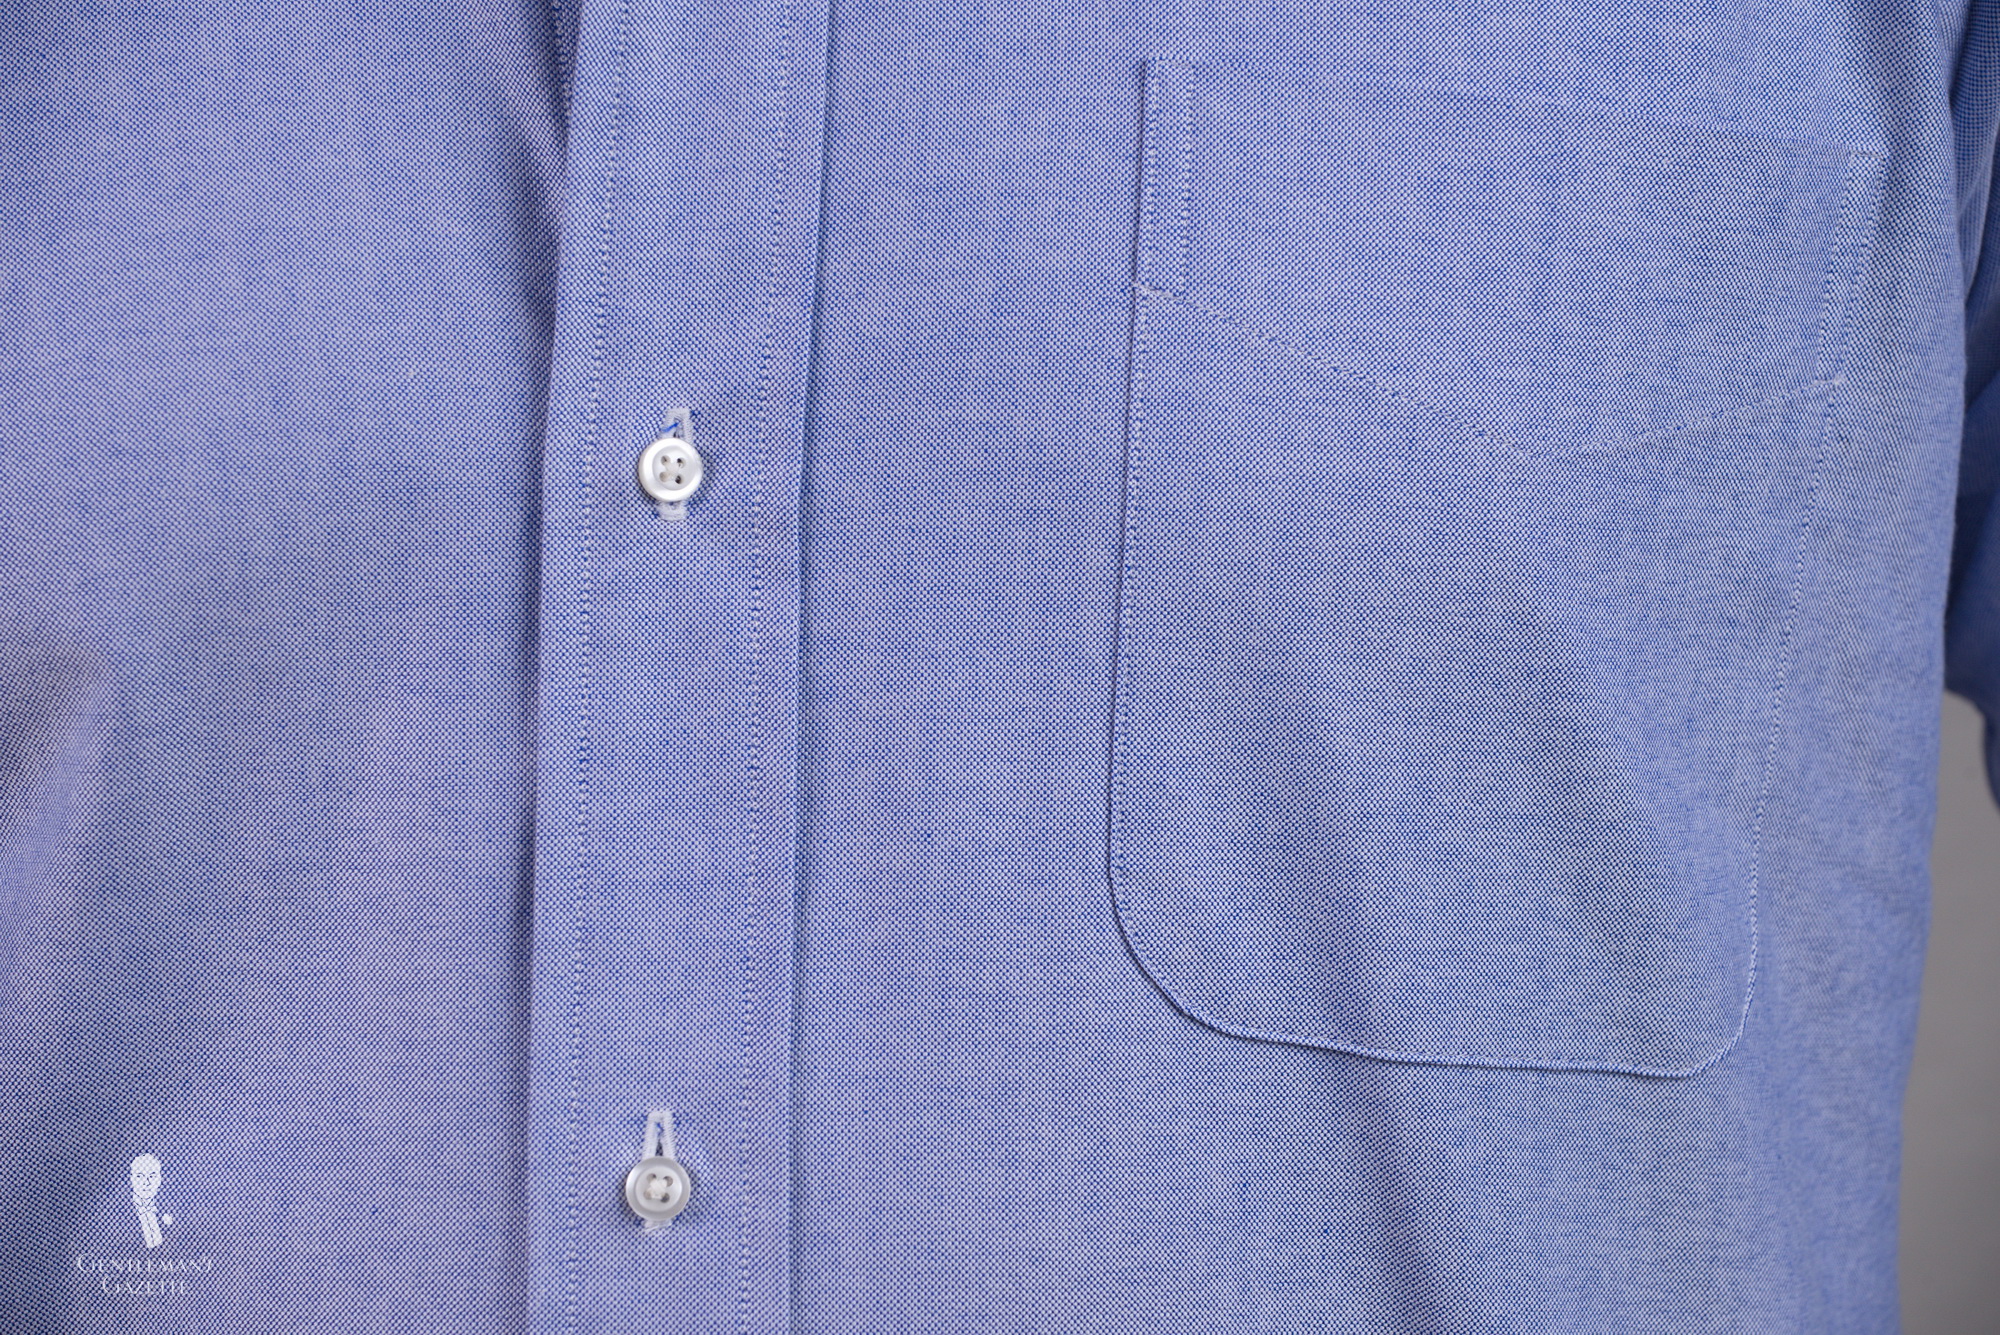 Dress Shirt Front with pocket - ideally you want to skip the pocket